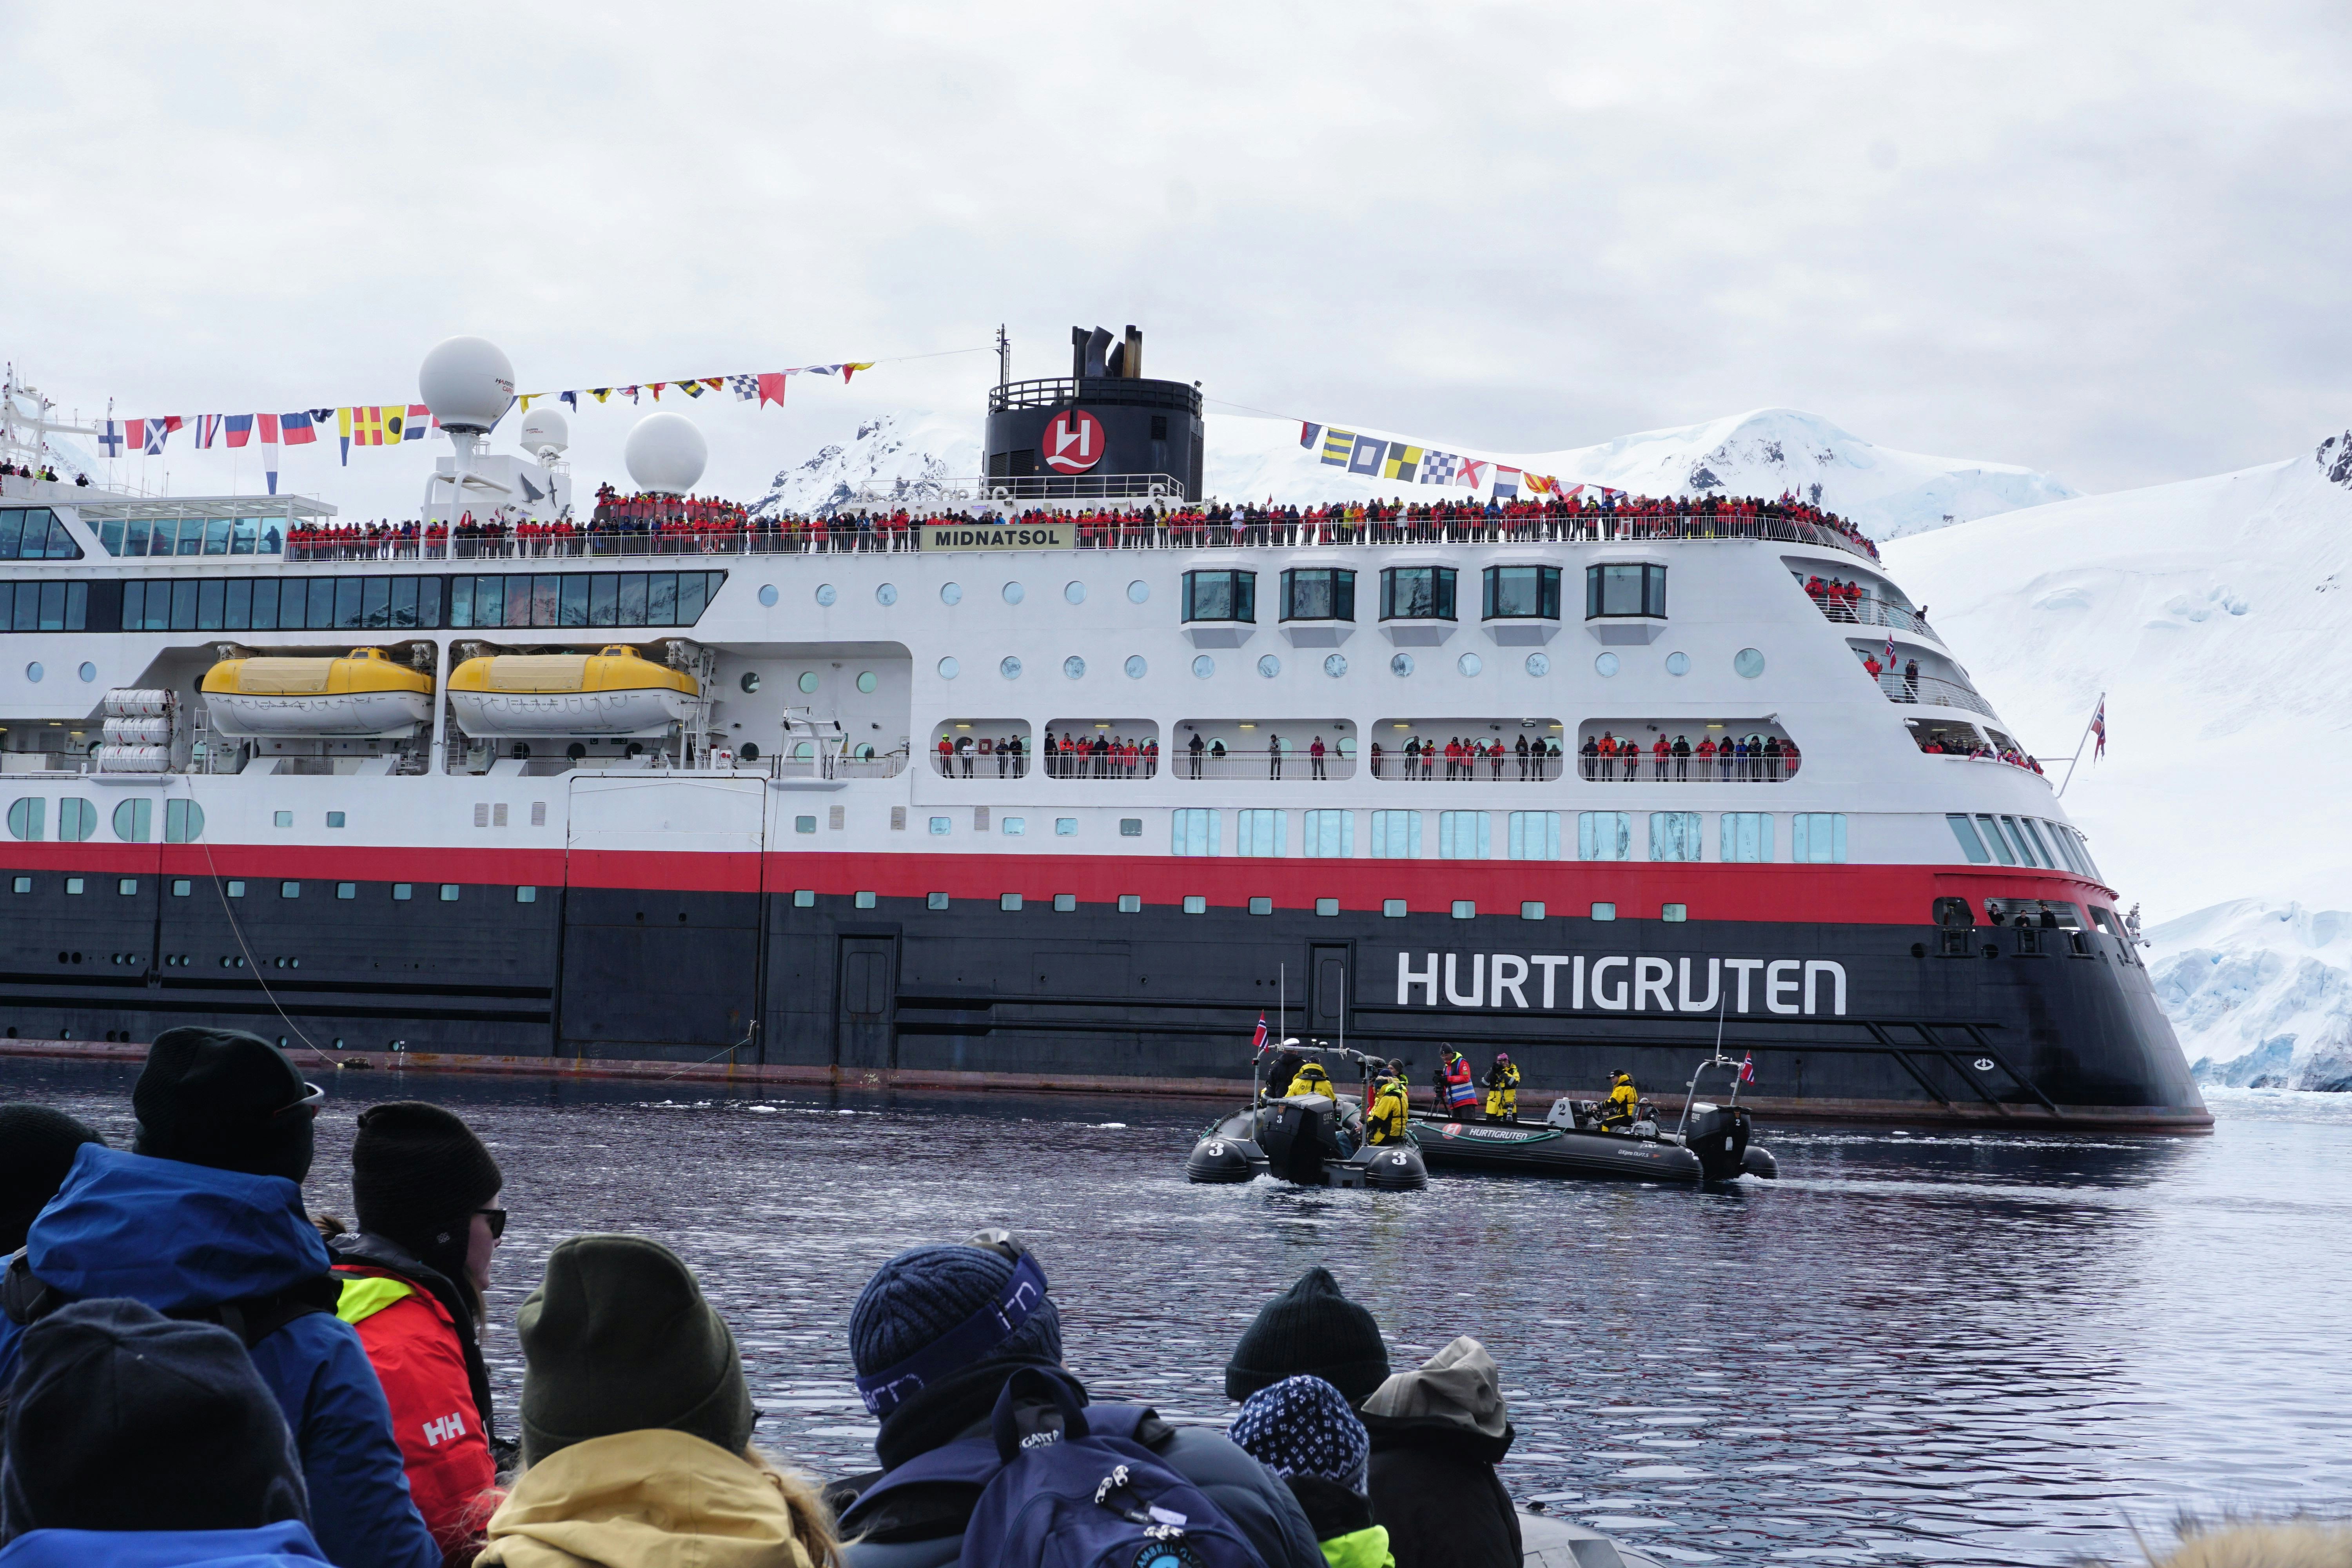 A crowd watches as a black Zodiac boat approaches the Hurtigruten MS Roald Amundsen for its naming ceremony in Antarctica